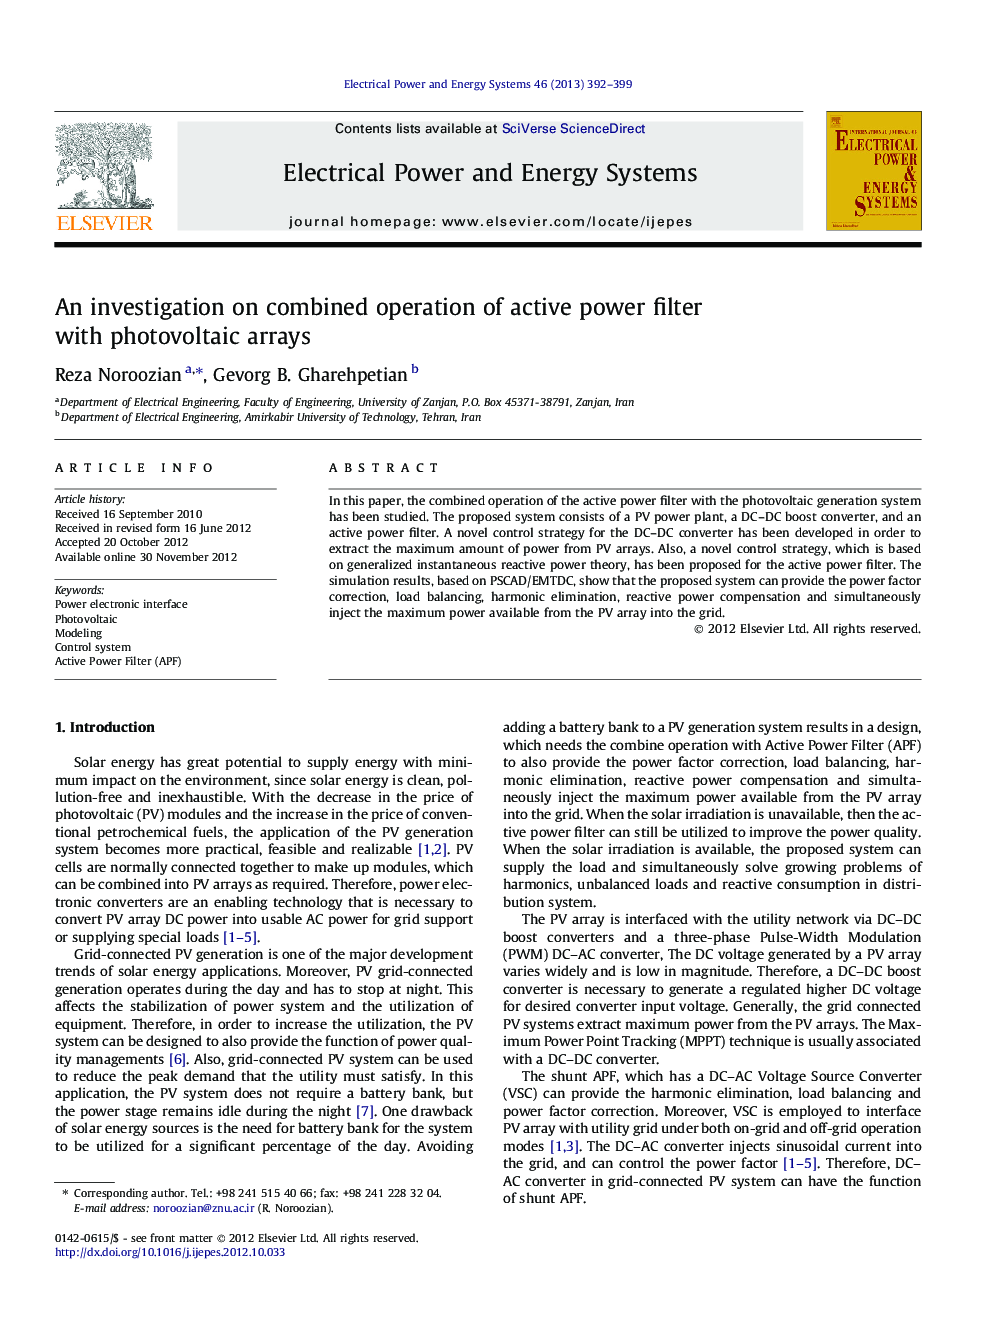 An investigation on combined operation of active power filter with photovoltaic arrays